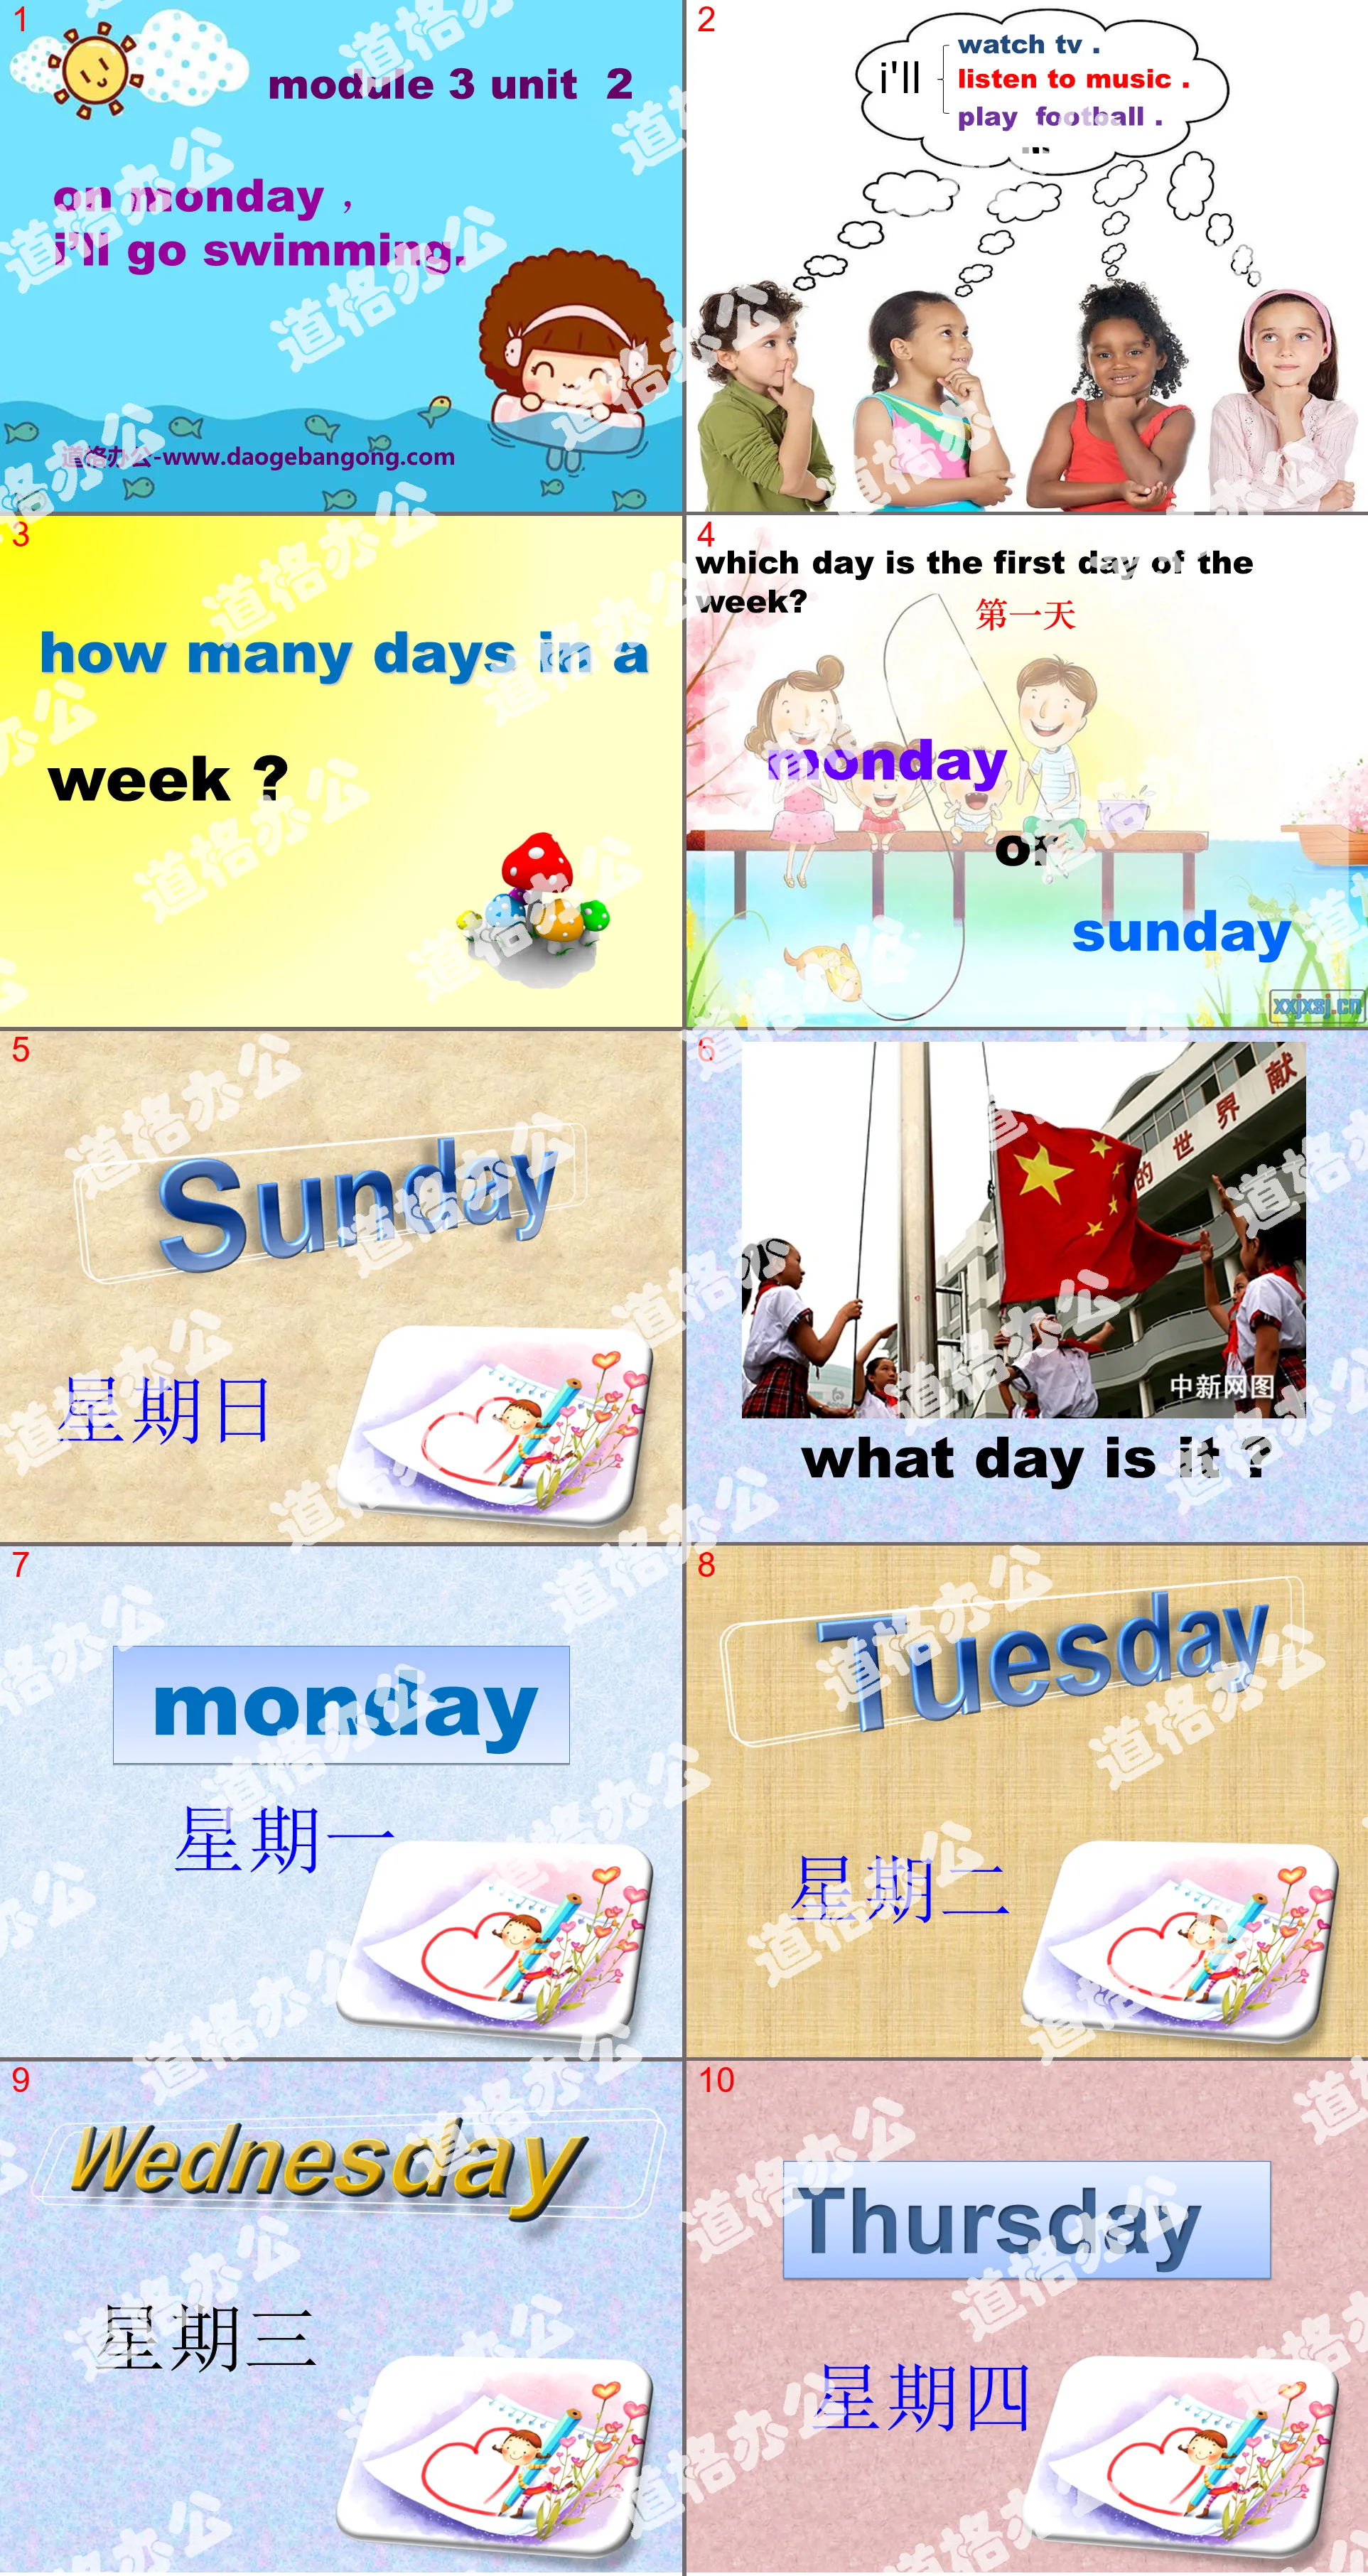 "On Monday I'll go swimming" PPT courseware